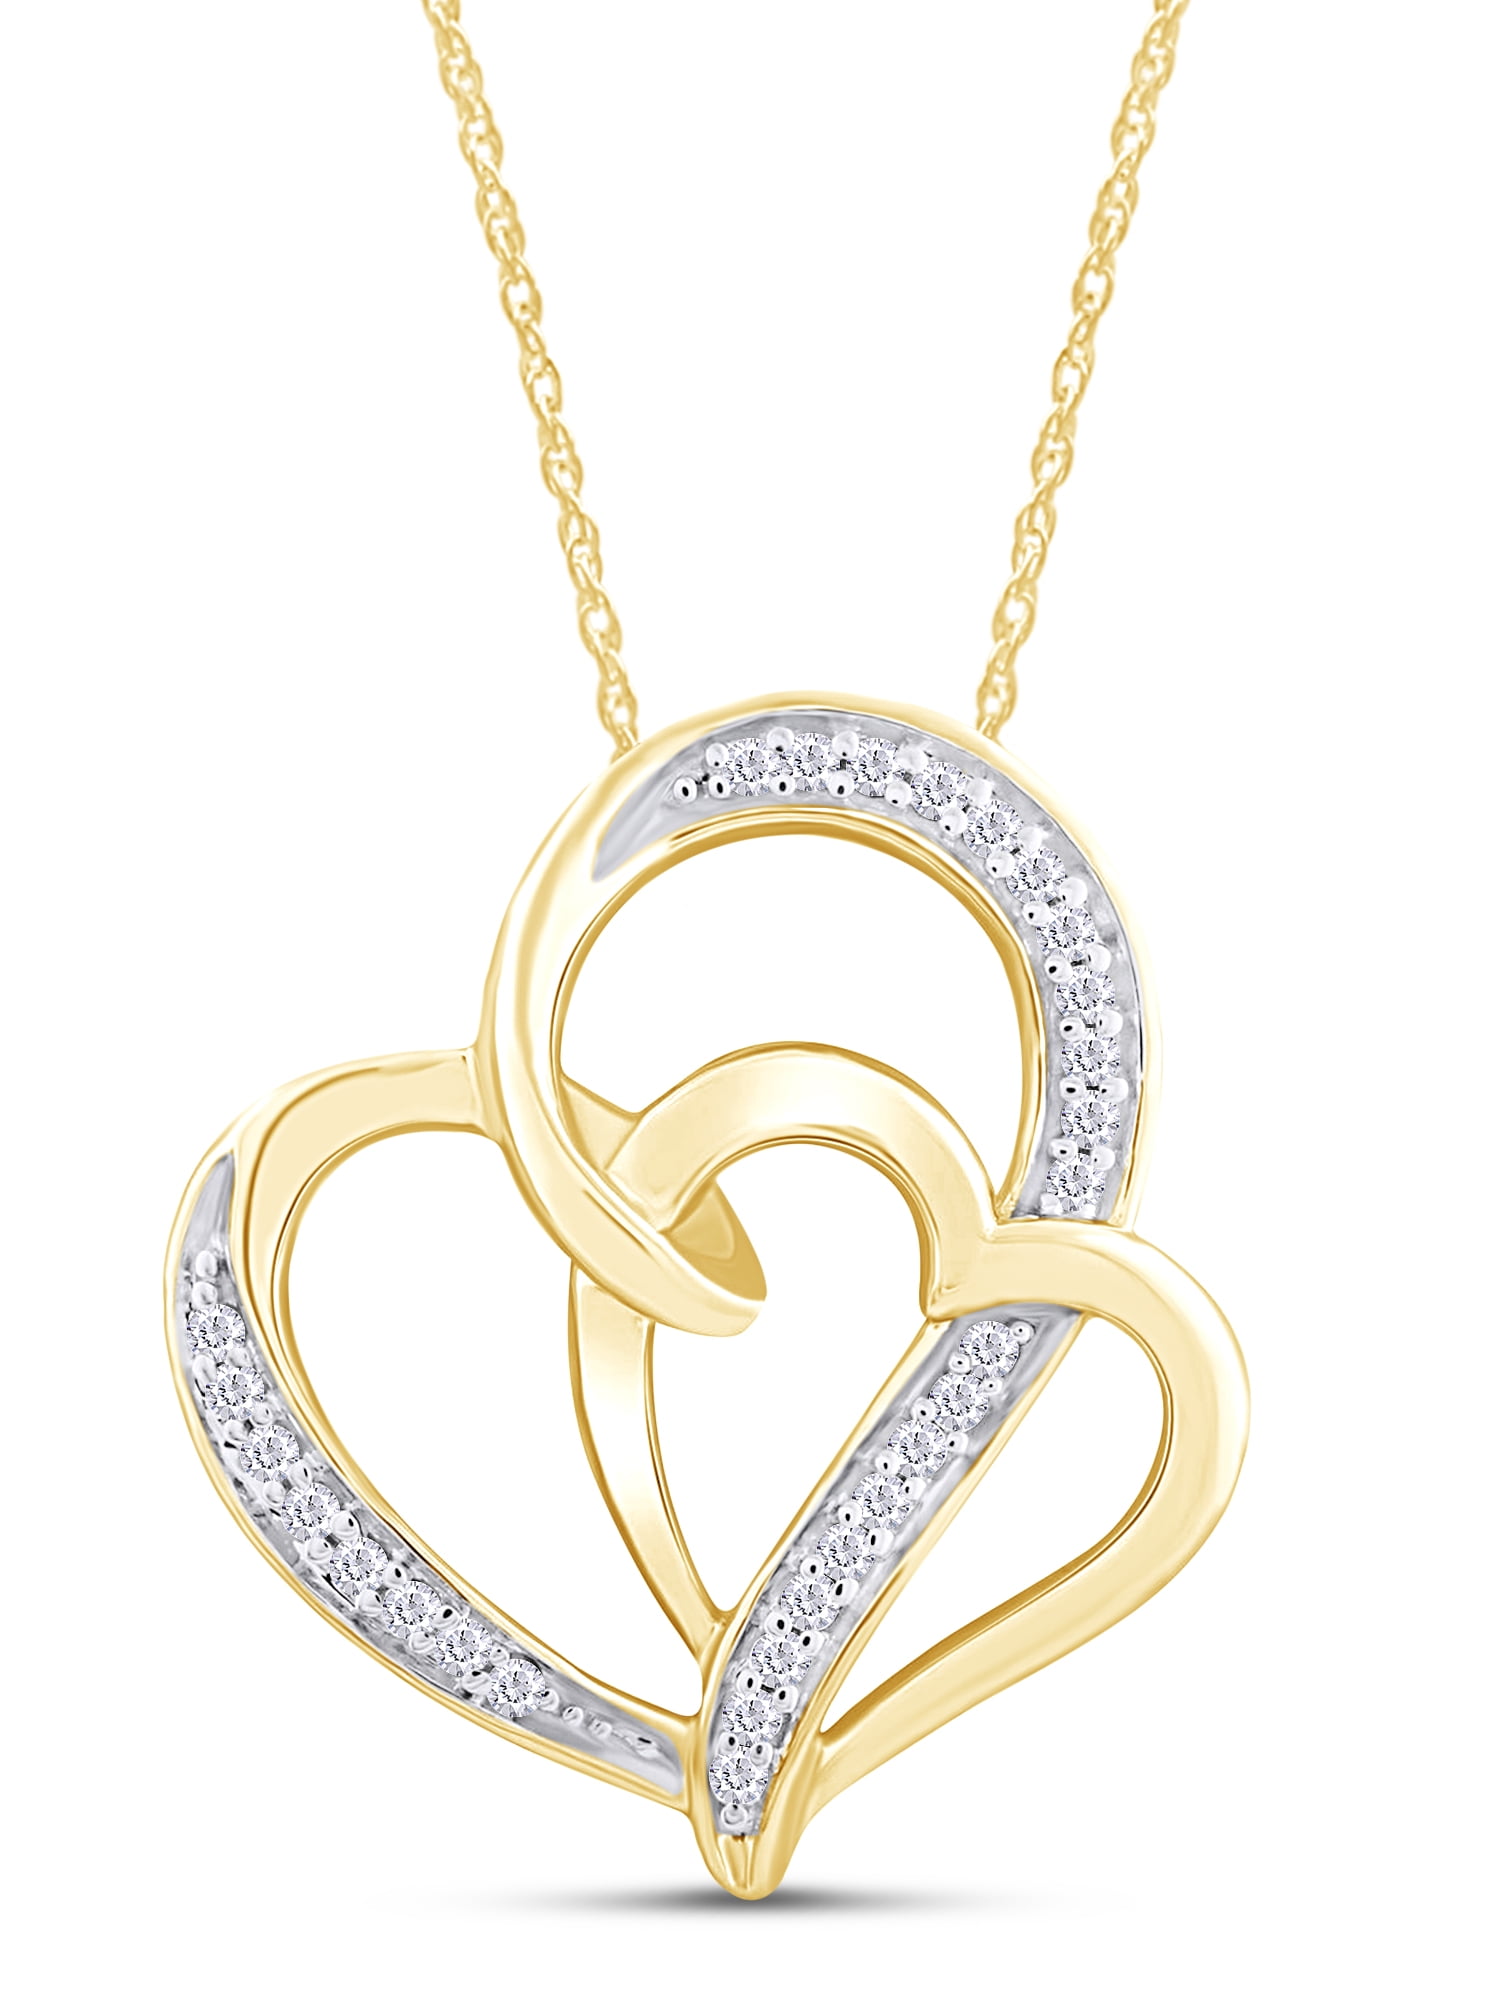 Wishrocks 14K Gold Over Sterling Silver Round Cut White CZ Solitaire Pendant Necklace 